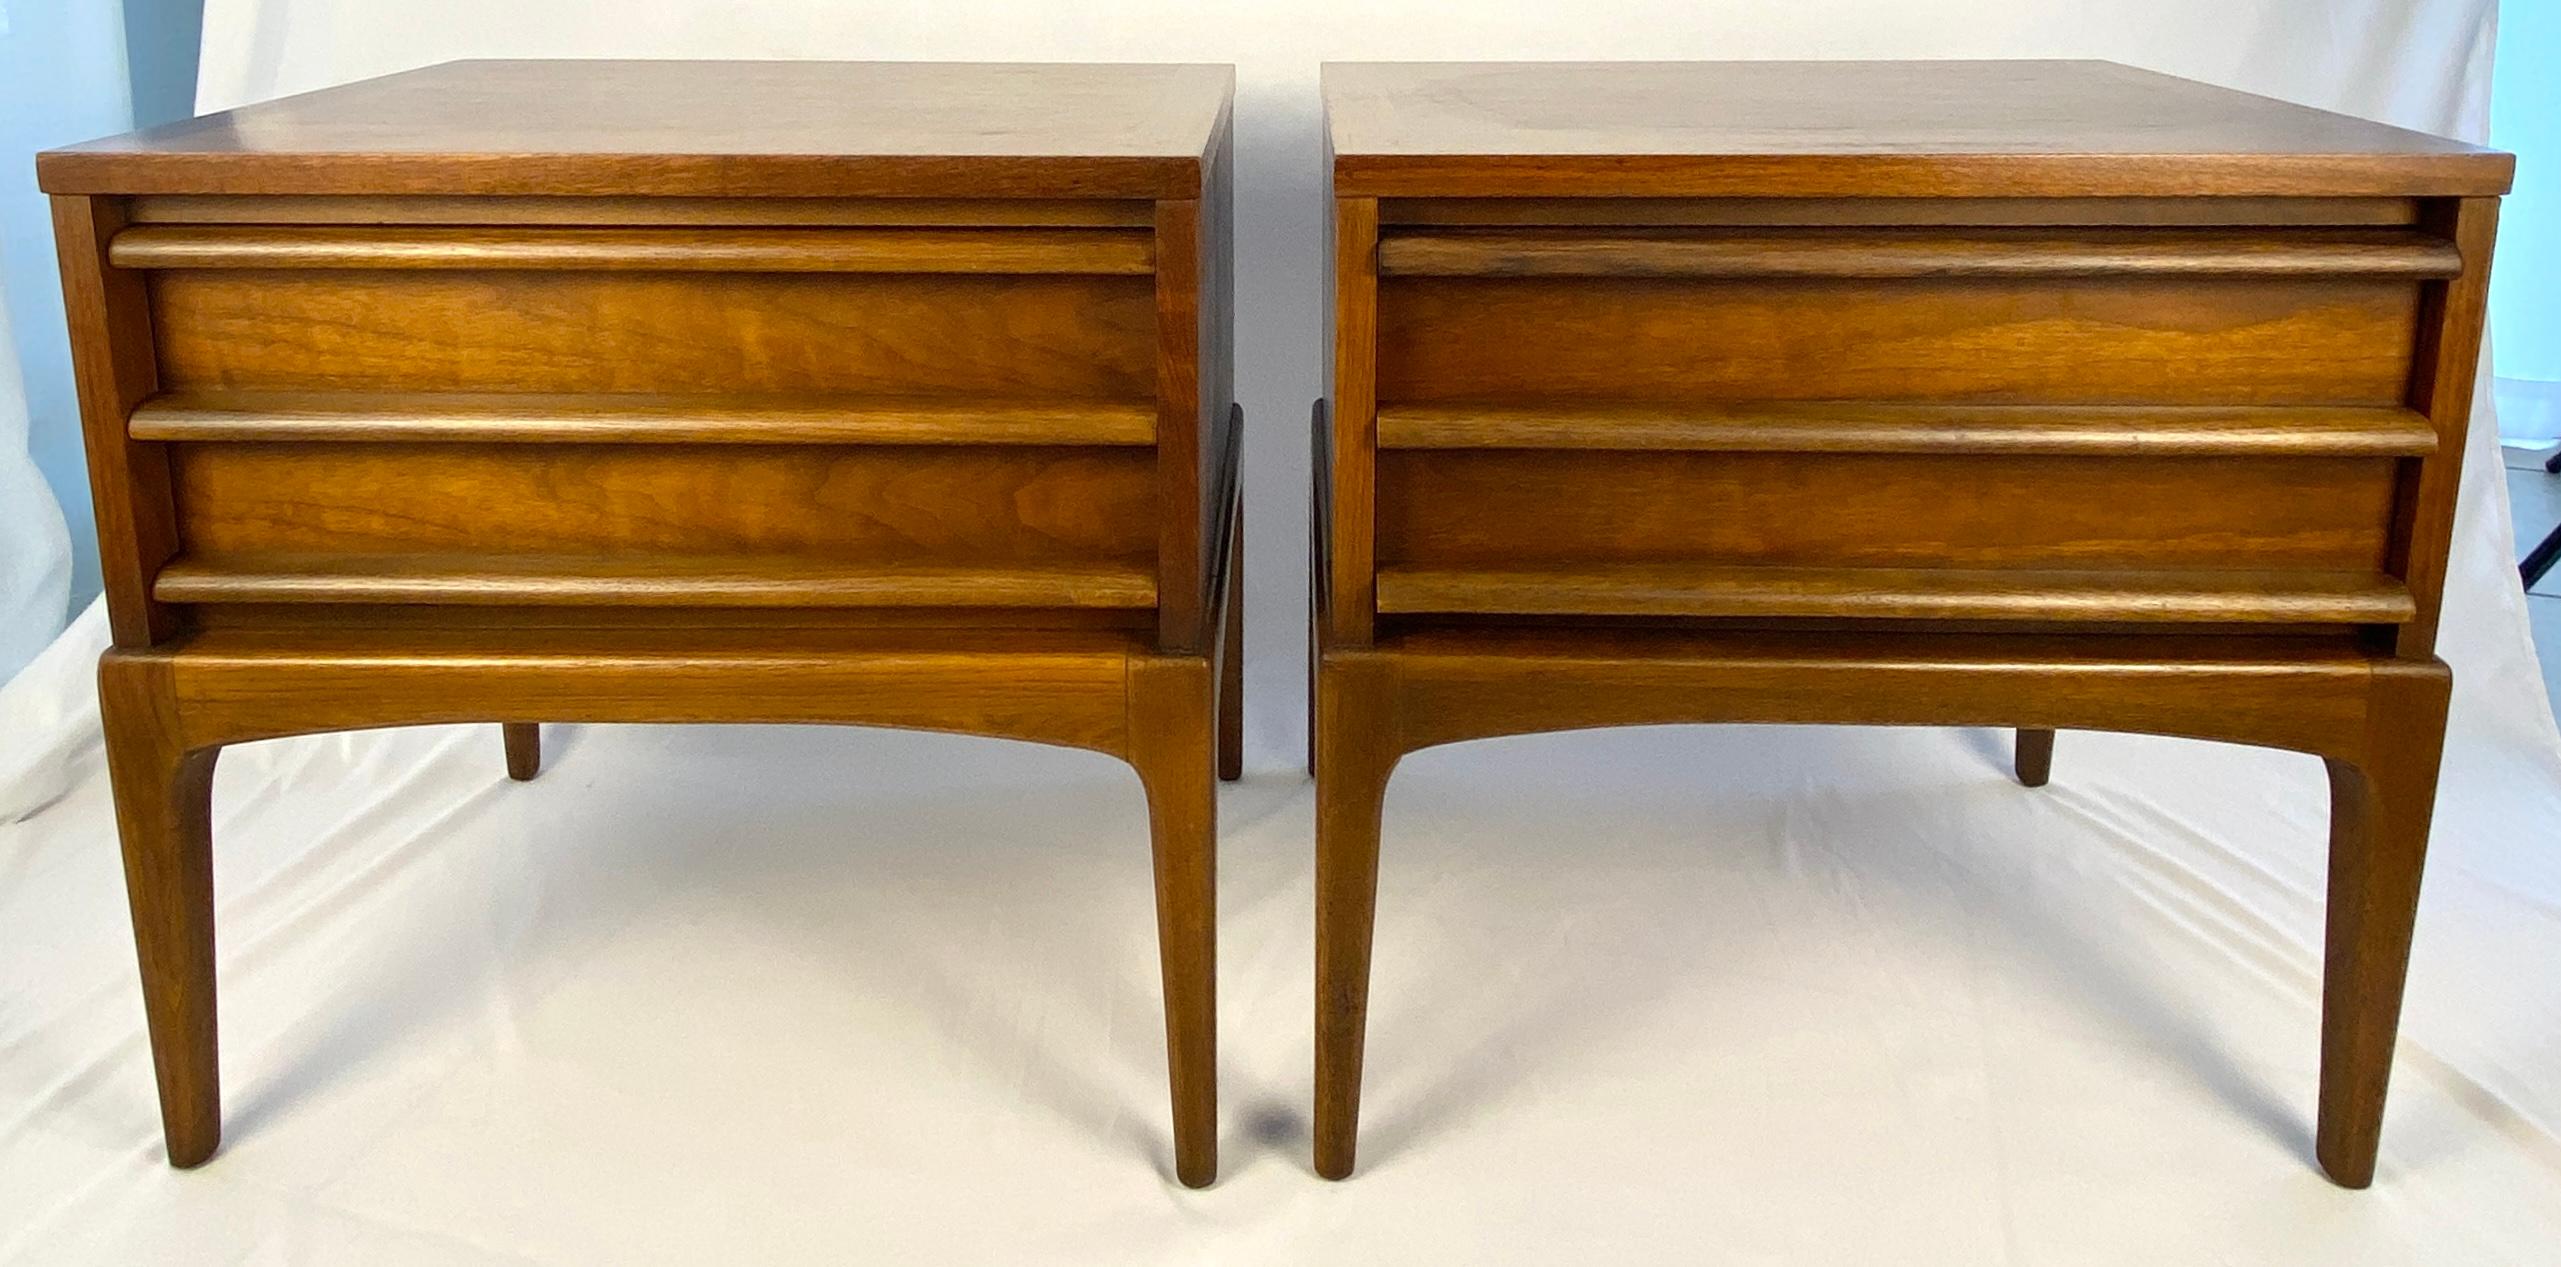 Pair of Mid Century Nightstands Paul McCobb Style Bedside Tables, Refinished For Sale 1